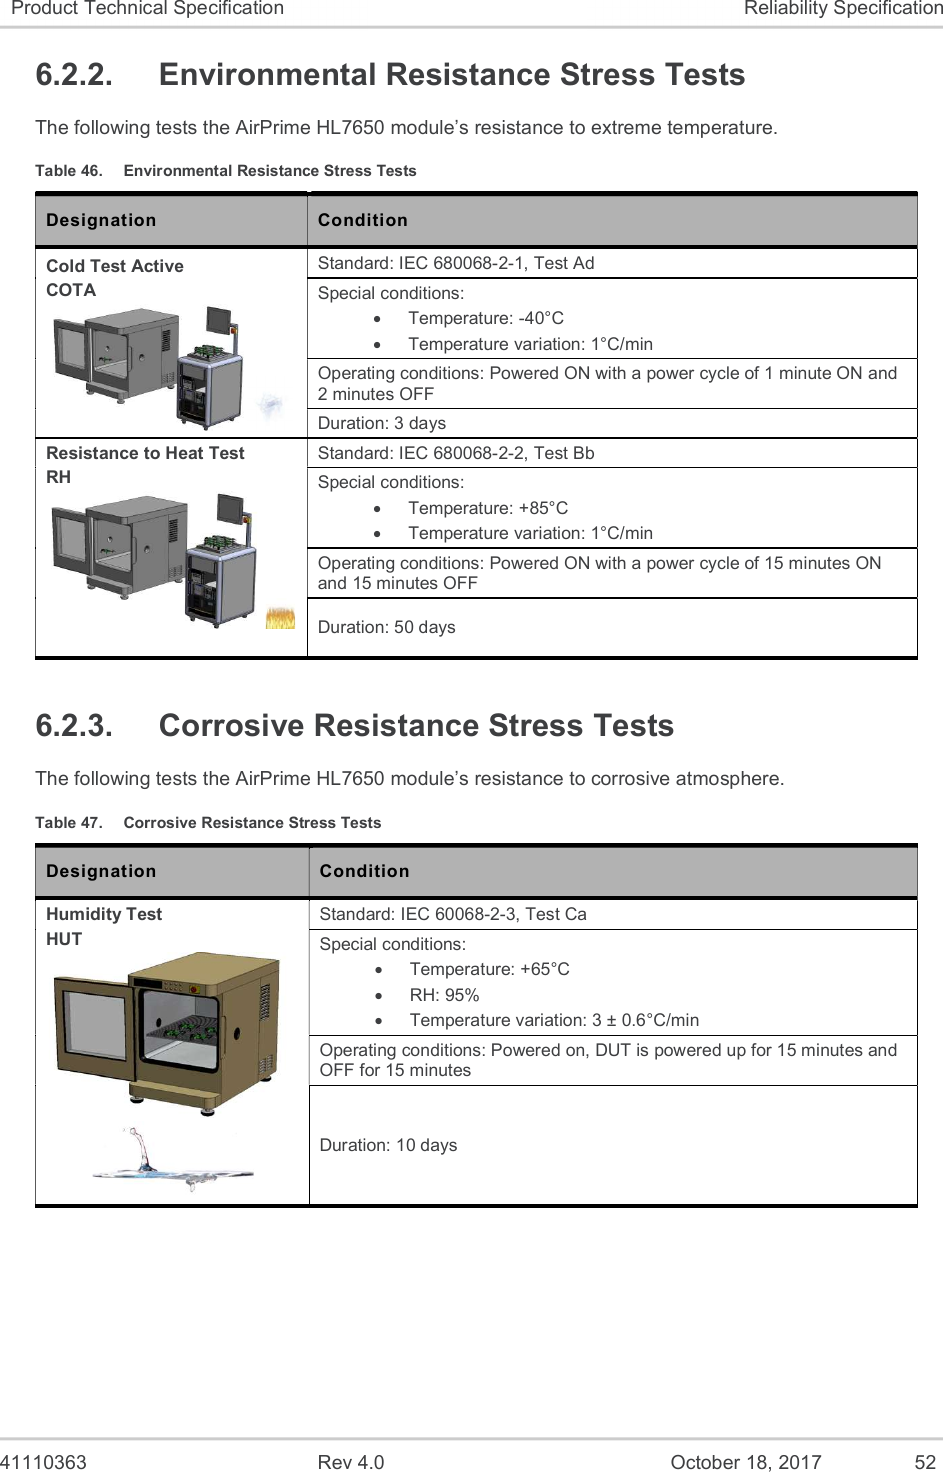   41110363  Rev 4.0  October 18, 2017  52 Product Technical Specification  Reliability Specification 6.2.2.  Environmental Resistance Stress Tests The following tests the AirPrime HL7650 module’s resistance to extreme temperature. Table 46.  Environmental Resistance Stress Tests Designation  Condition Cold Test Active COTA  Standard: IEC 680068-2-1, Test Ad Special conditions:   Temperature: -40°C   Temperature variation: 1°C/min Operating conditions: Powered ON with a power cycle of 1 minute ON and 2 minutes OFF Duration: 3 days Resistance to Heat Test RH   Standard: IEC 680068-2-2, Test Bb Special conditions:   Temperature: +85°C   Temperature variation: 1°C/min  Operating conditions: Powered ON with a power cycle of 15 minutes ON and 15 minutes OFF Duration: 50 days 6.2.3.  Corrosive Resistance Stress Tests The following tests the AirPrime HL7650 module’s resistance to corrosive atmosphere. Table 47.  Corrosive Resistance Stress Tests Designation  Condition Humidity Test HUT   Standard: IEC 60068-2-3, Test Ca Special conditions:   Temperature: +65°C   RH: 95%   Temperature variation: 3 ± 0.6°C/min  Operating conditions: Powered on, DUT is powered up for 15 minutes and OFF for 15 minutes Duration: 10 days 